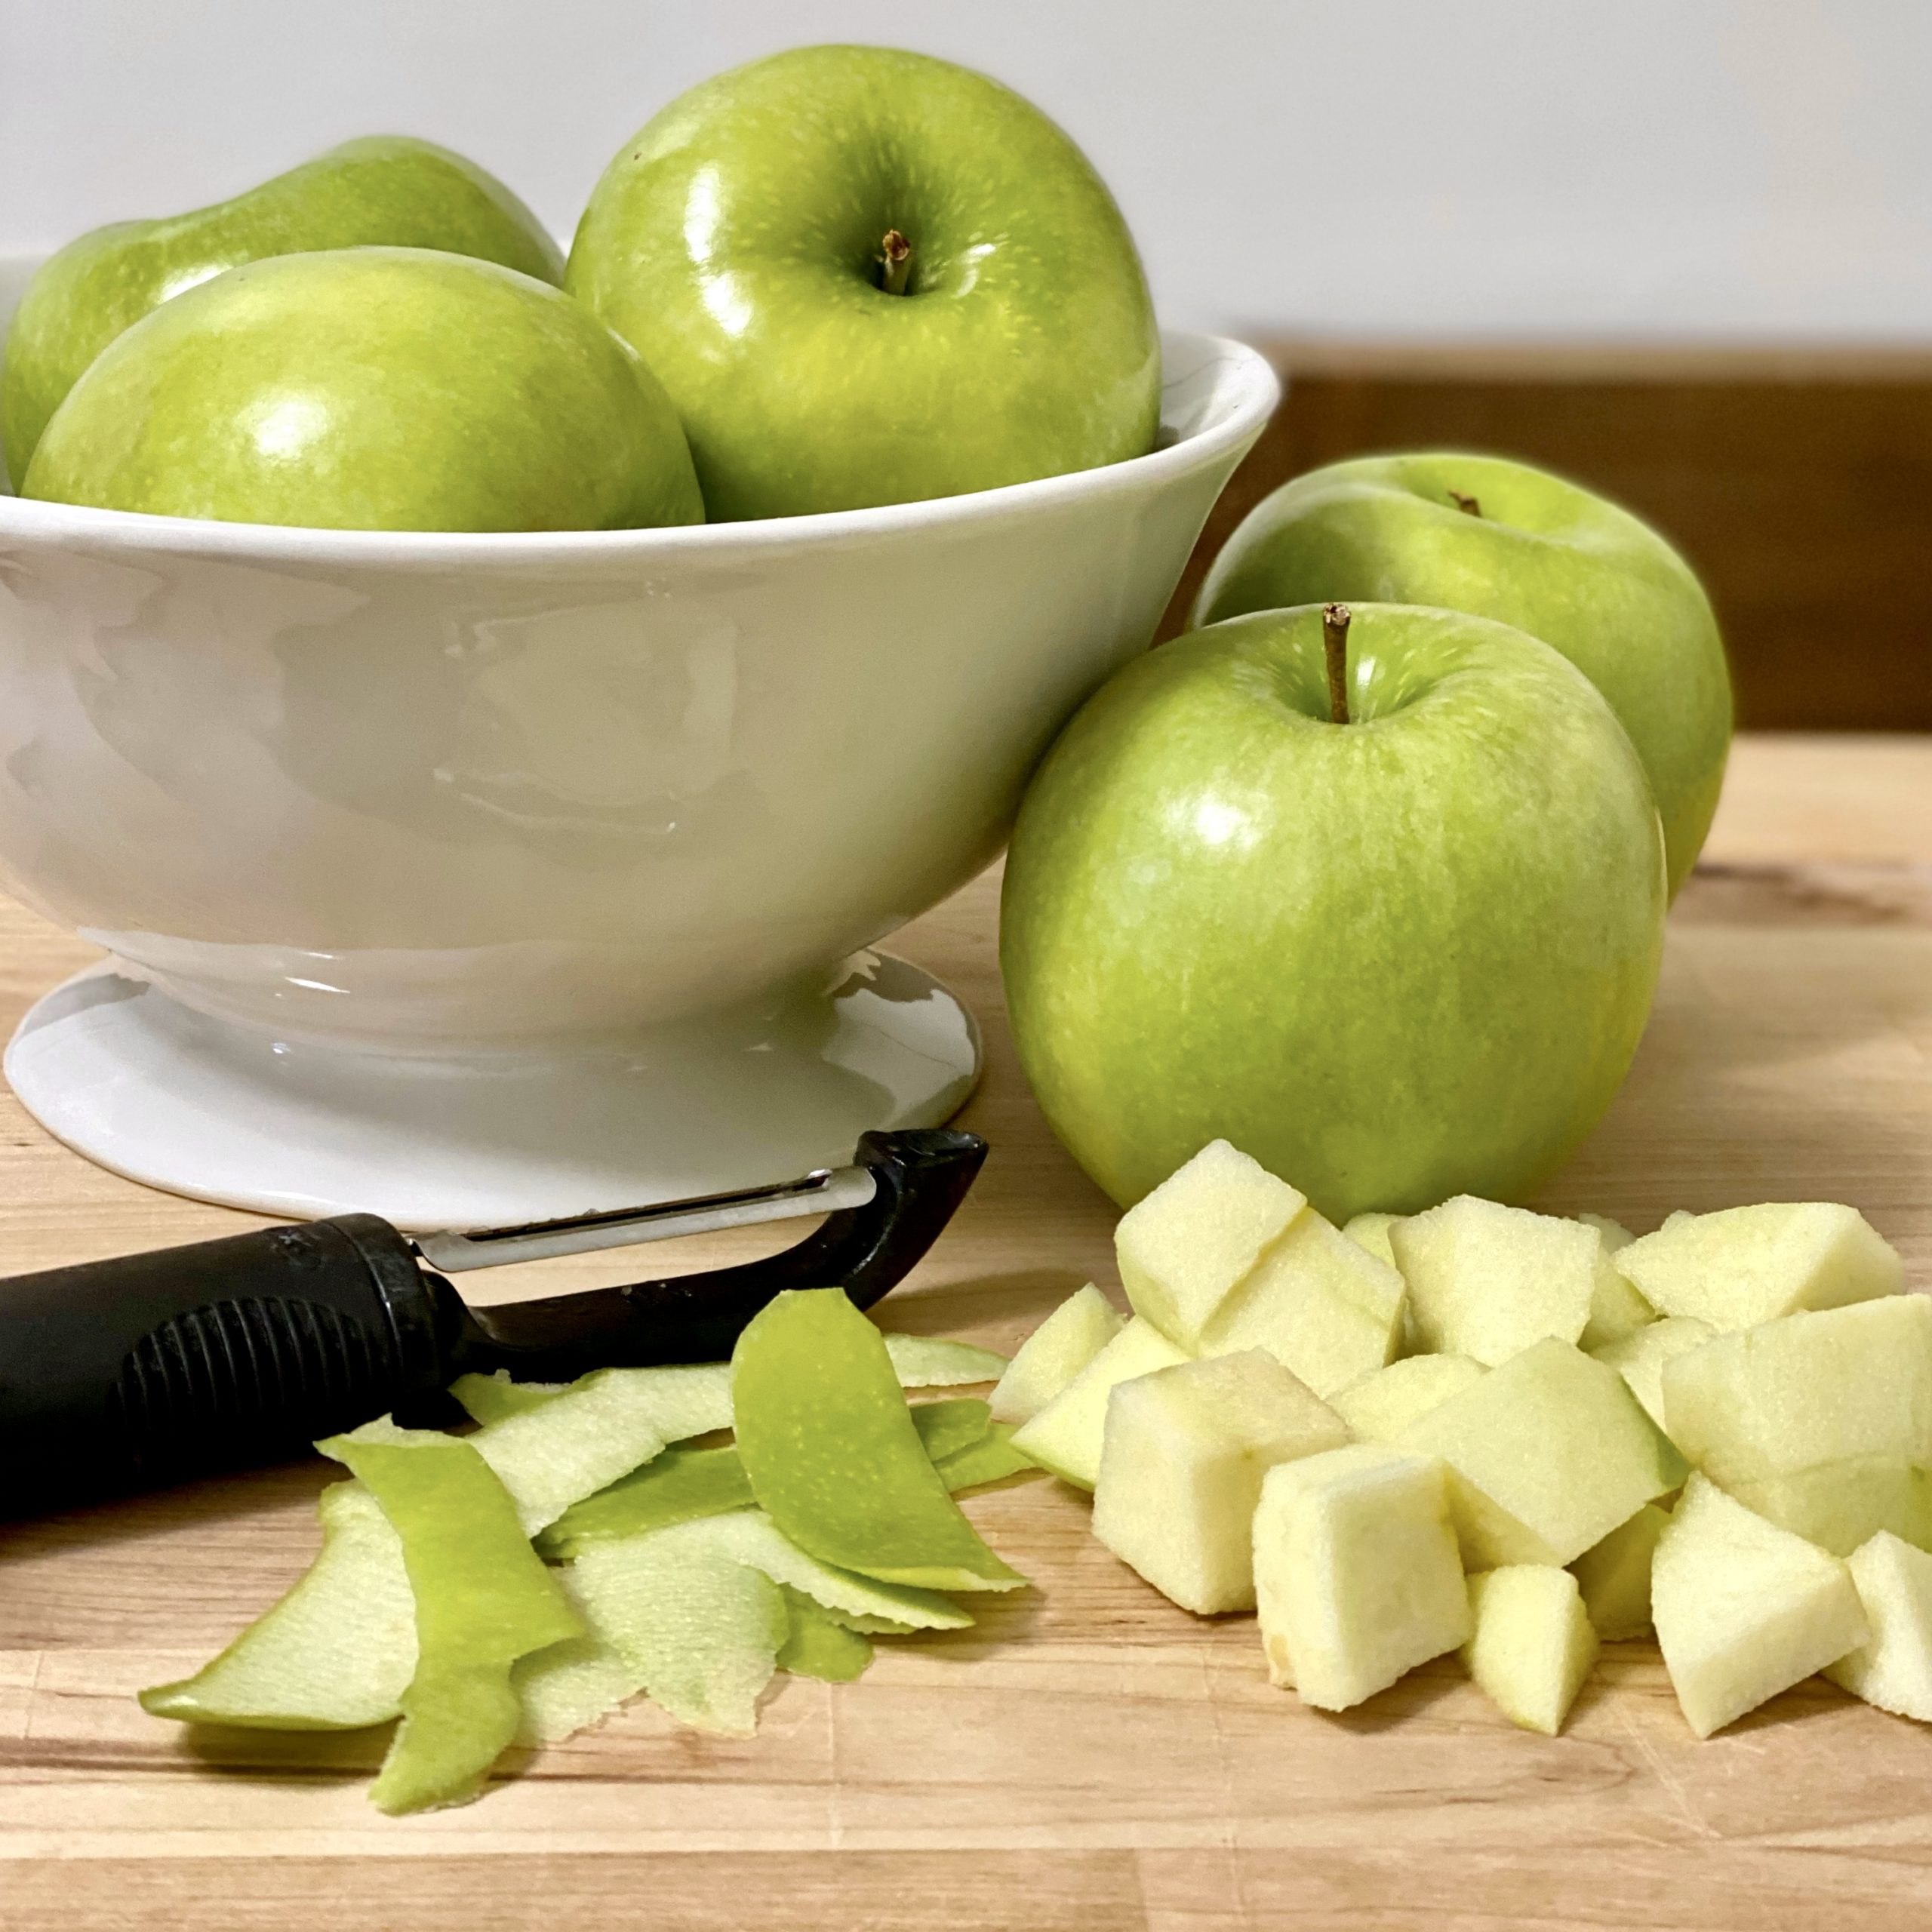 Granny Smith apples in a white pedestal bowl on a wood cutting board. More apples are on the cutting board with a peeler, apple peels, and cubed apple pieces.